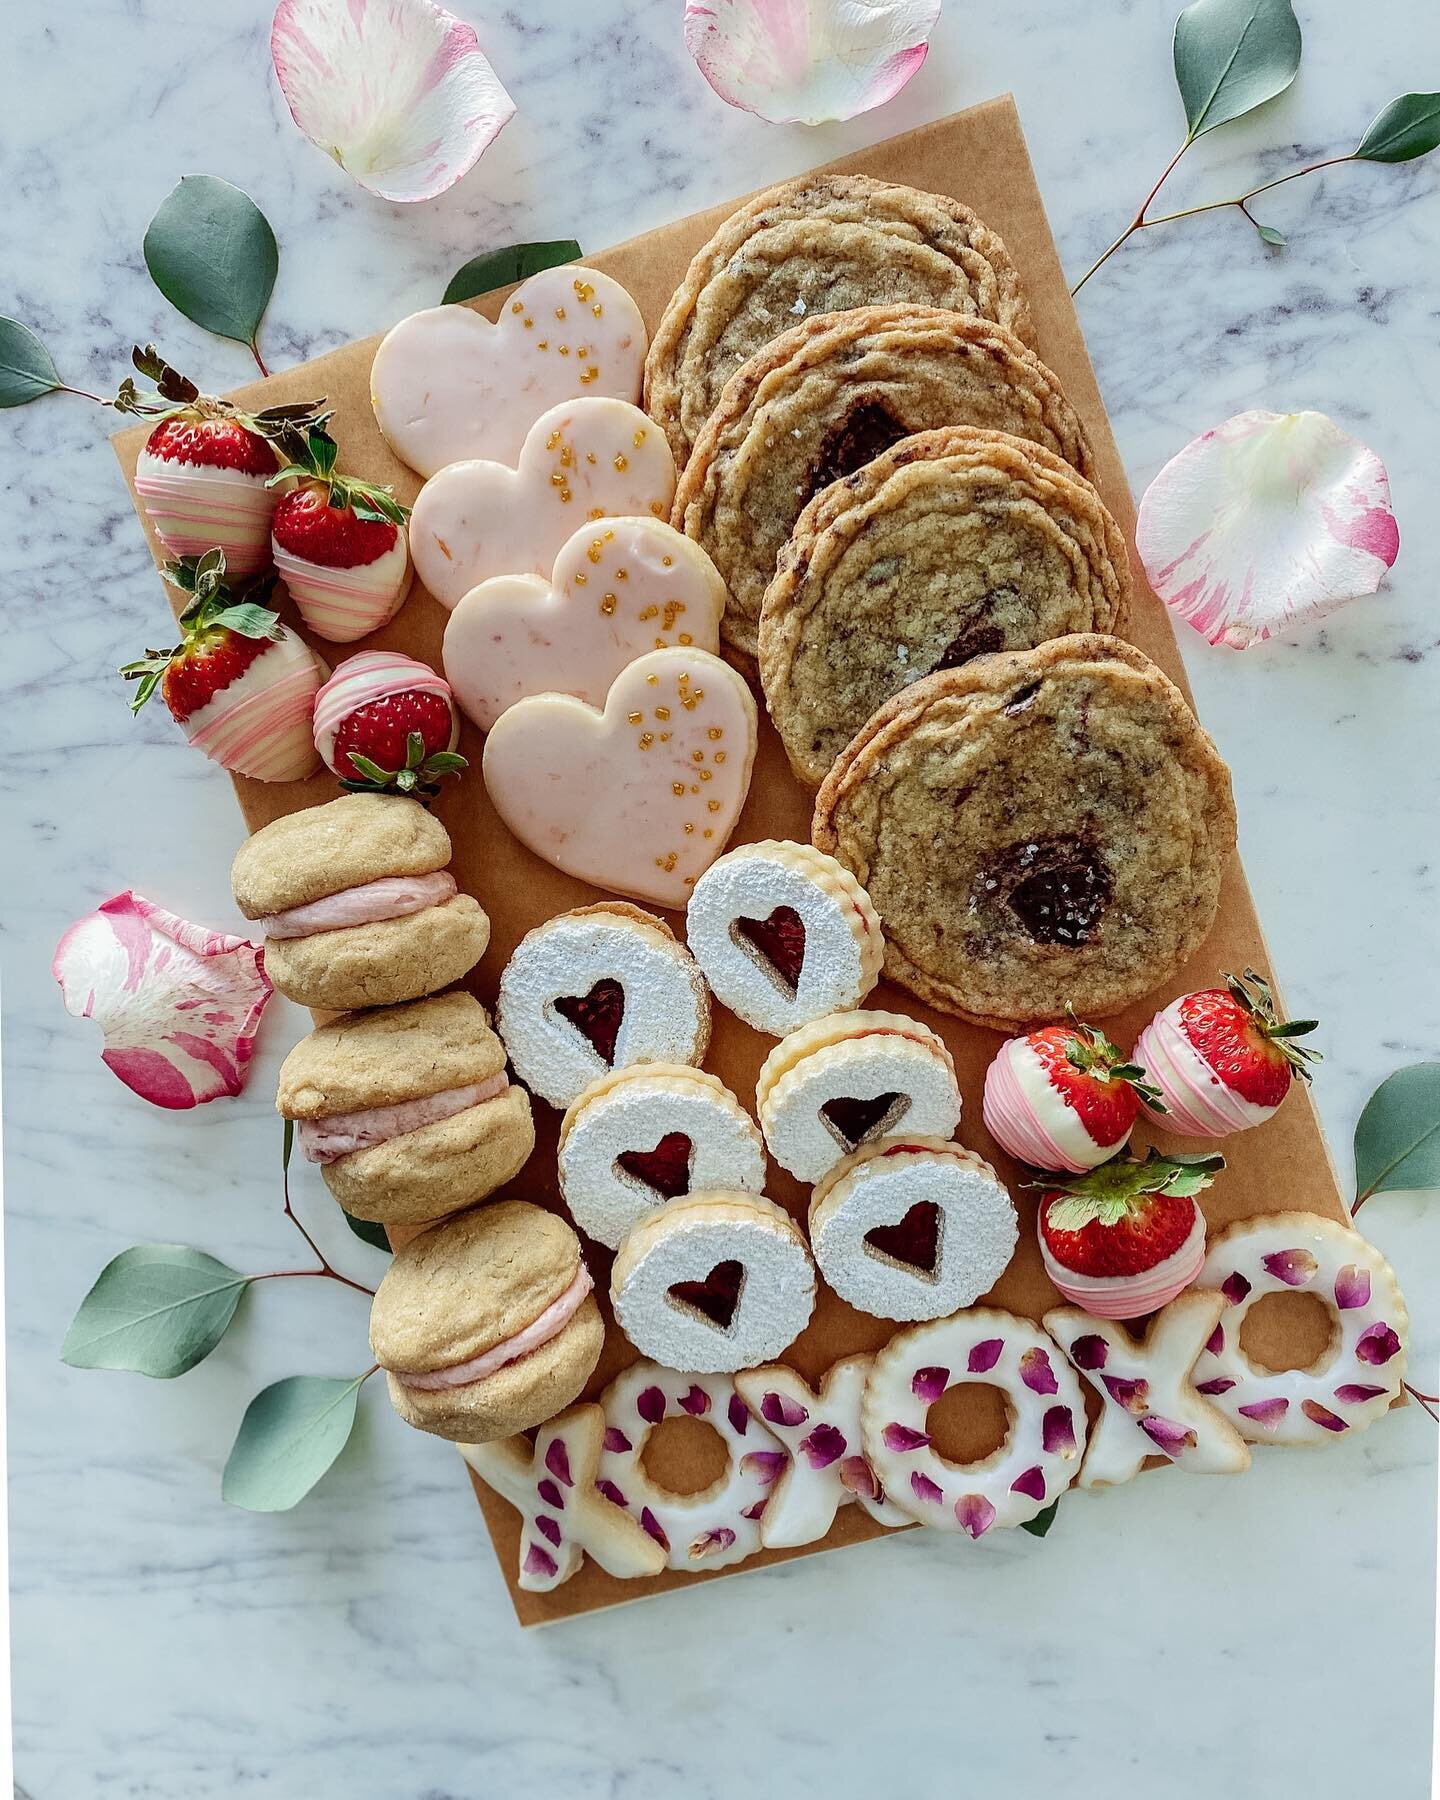 Share the love with our Valentine&rsquo;s Day cookie board! 😍🥰 Six delectable treats including:
✔️chocolate chunk cookies w/ sea salt
✔️ rose tea cookies
✔️ linzer cookies w/ raspberry preserves
✔️ shortbread cookies w/ blood orange glaze
✔️ peanut